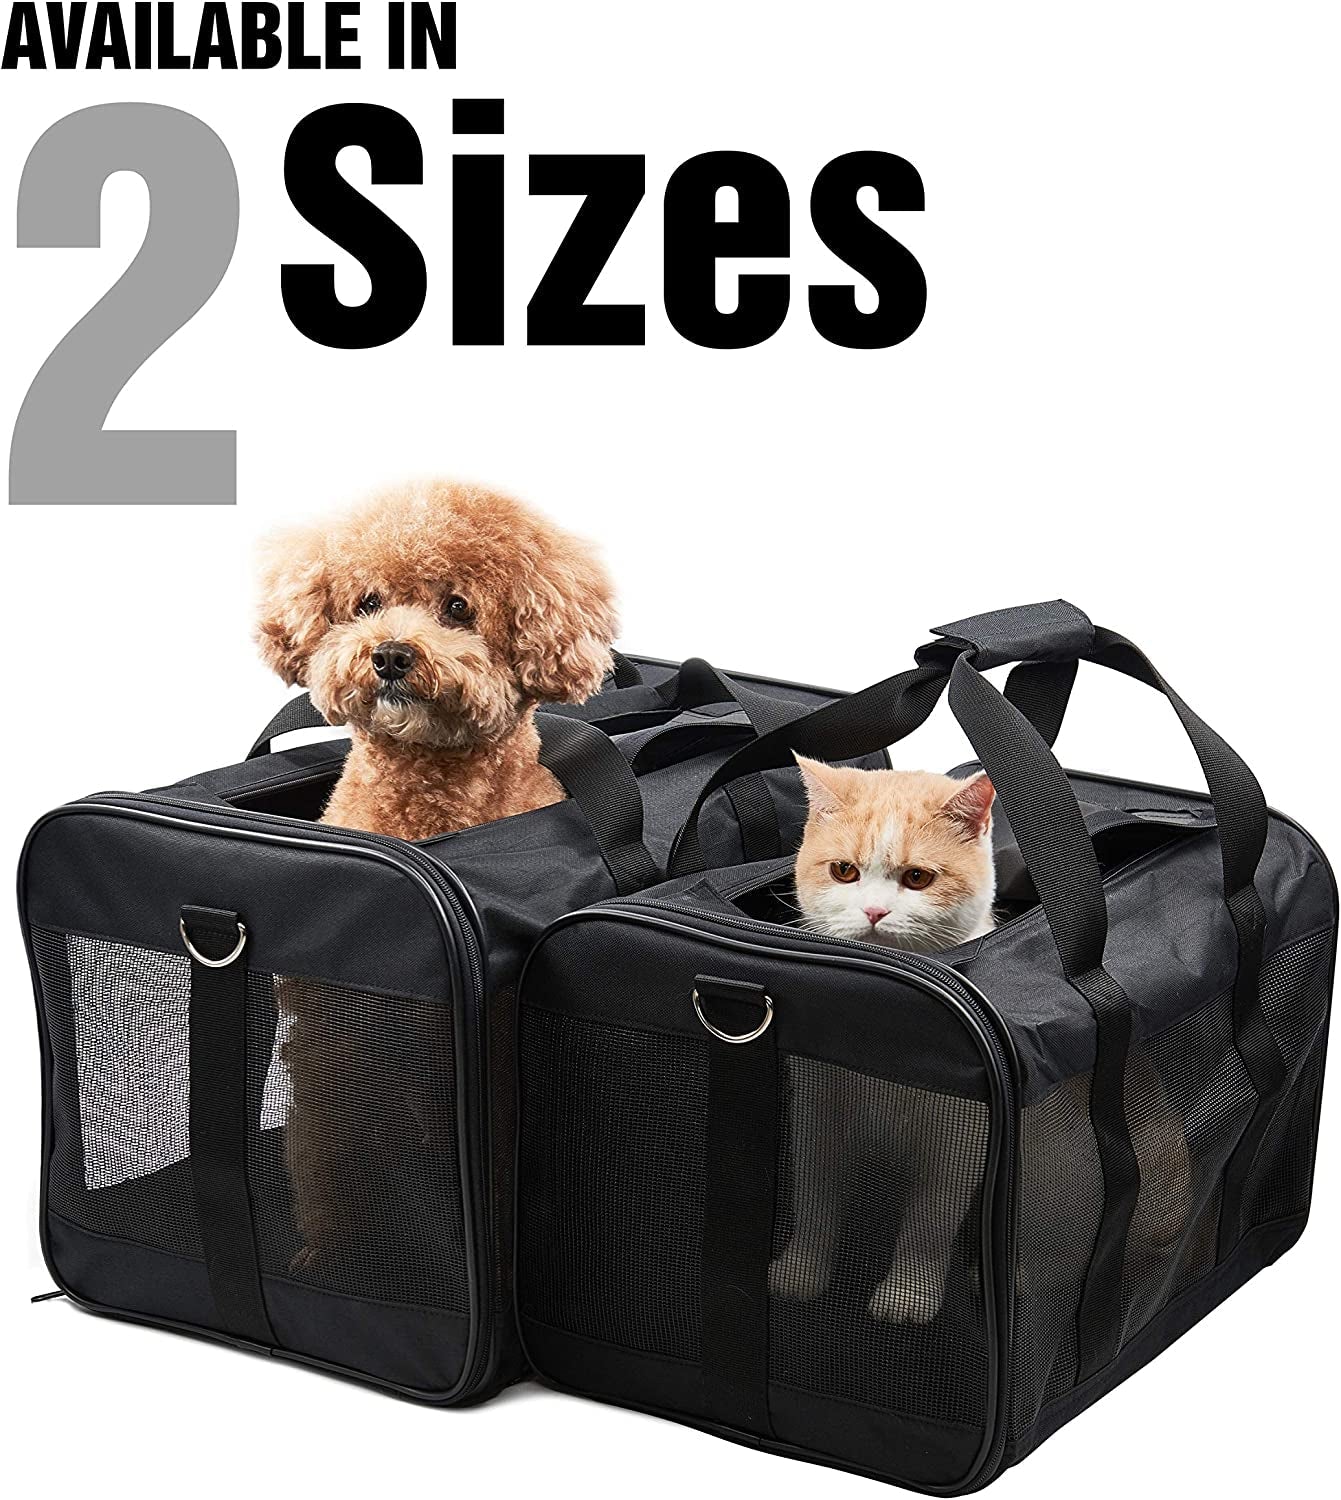 Scratchme Pet Travel Carrier Soft Sided Portable Bag for Cats, Small Dogs, Kittens or Puppies, Collapsible, Durable, Airline Approved, Travel Friendly, Carry Your Pet with You Safely and Comfortably - PETGS